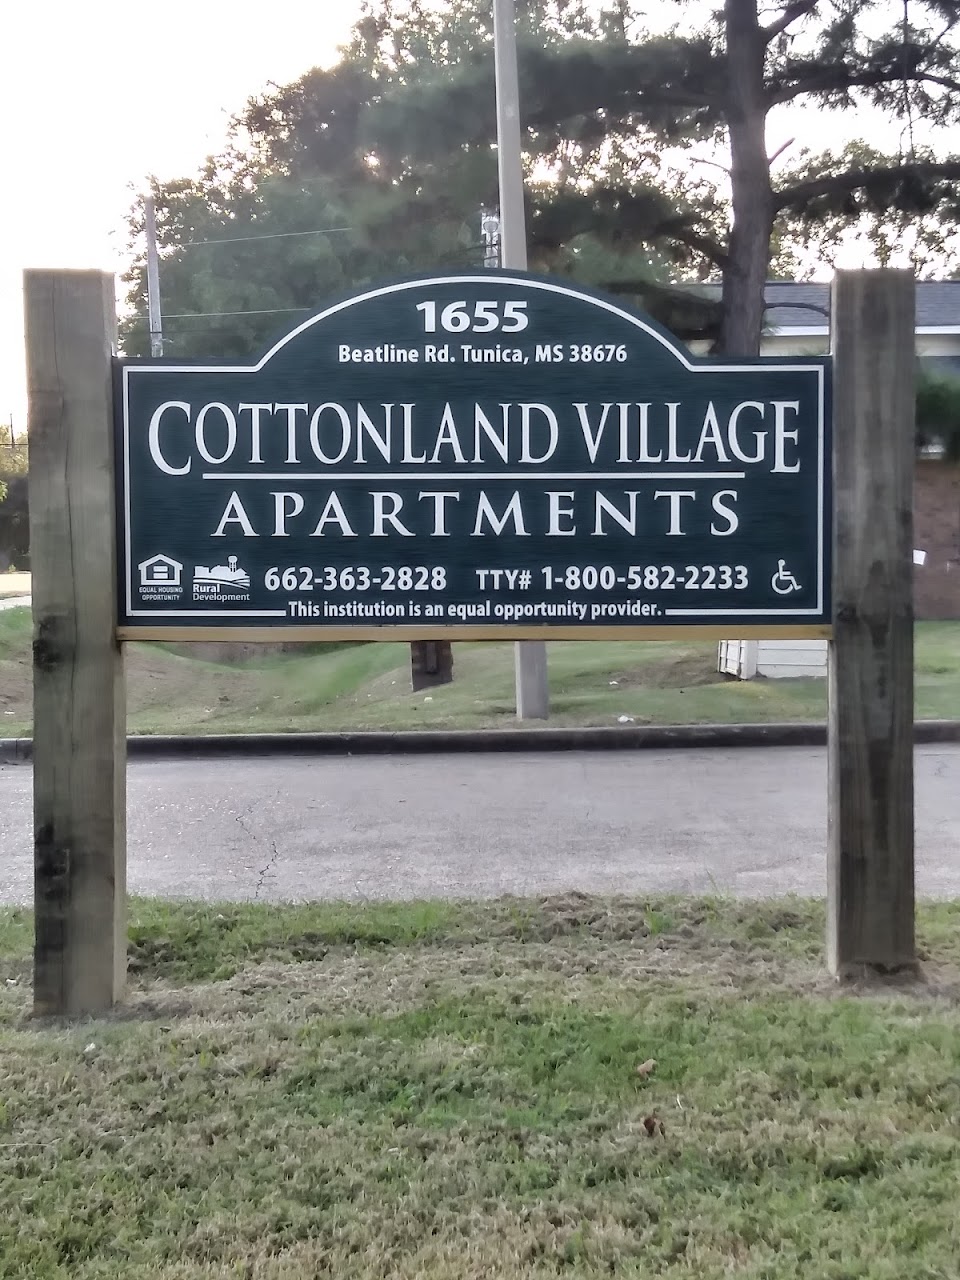 Photo of COTTONLAND VILLAGE APARTMENTS. Affordable housing located at 1655 BEAT LINE ROAD TUNICA, MS 38676